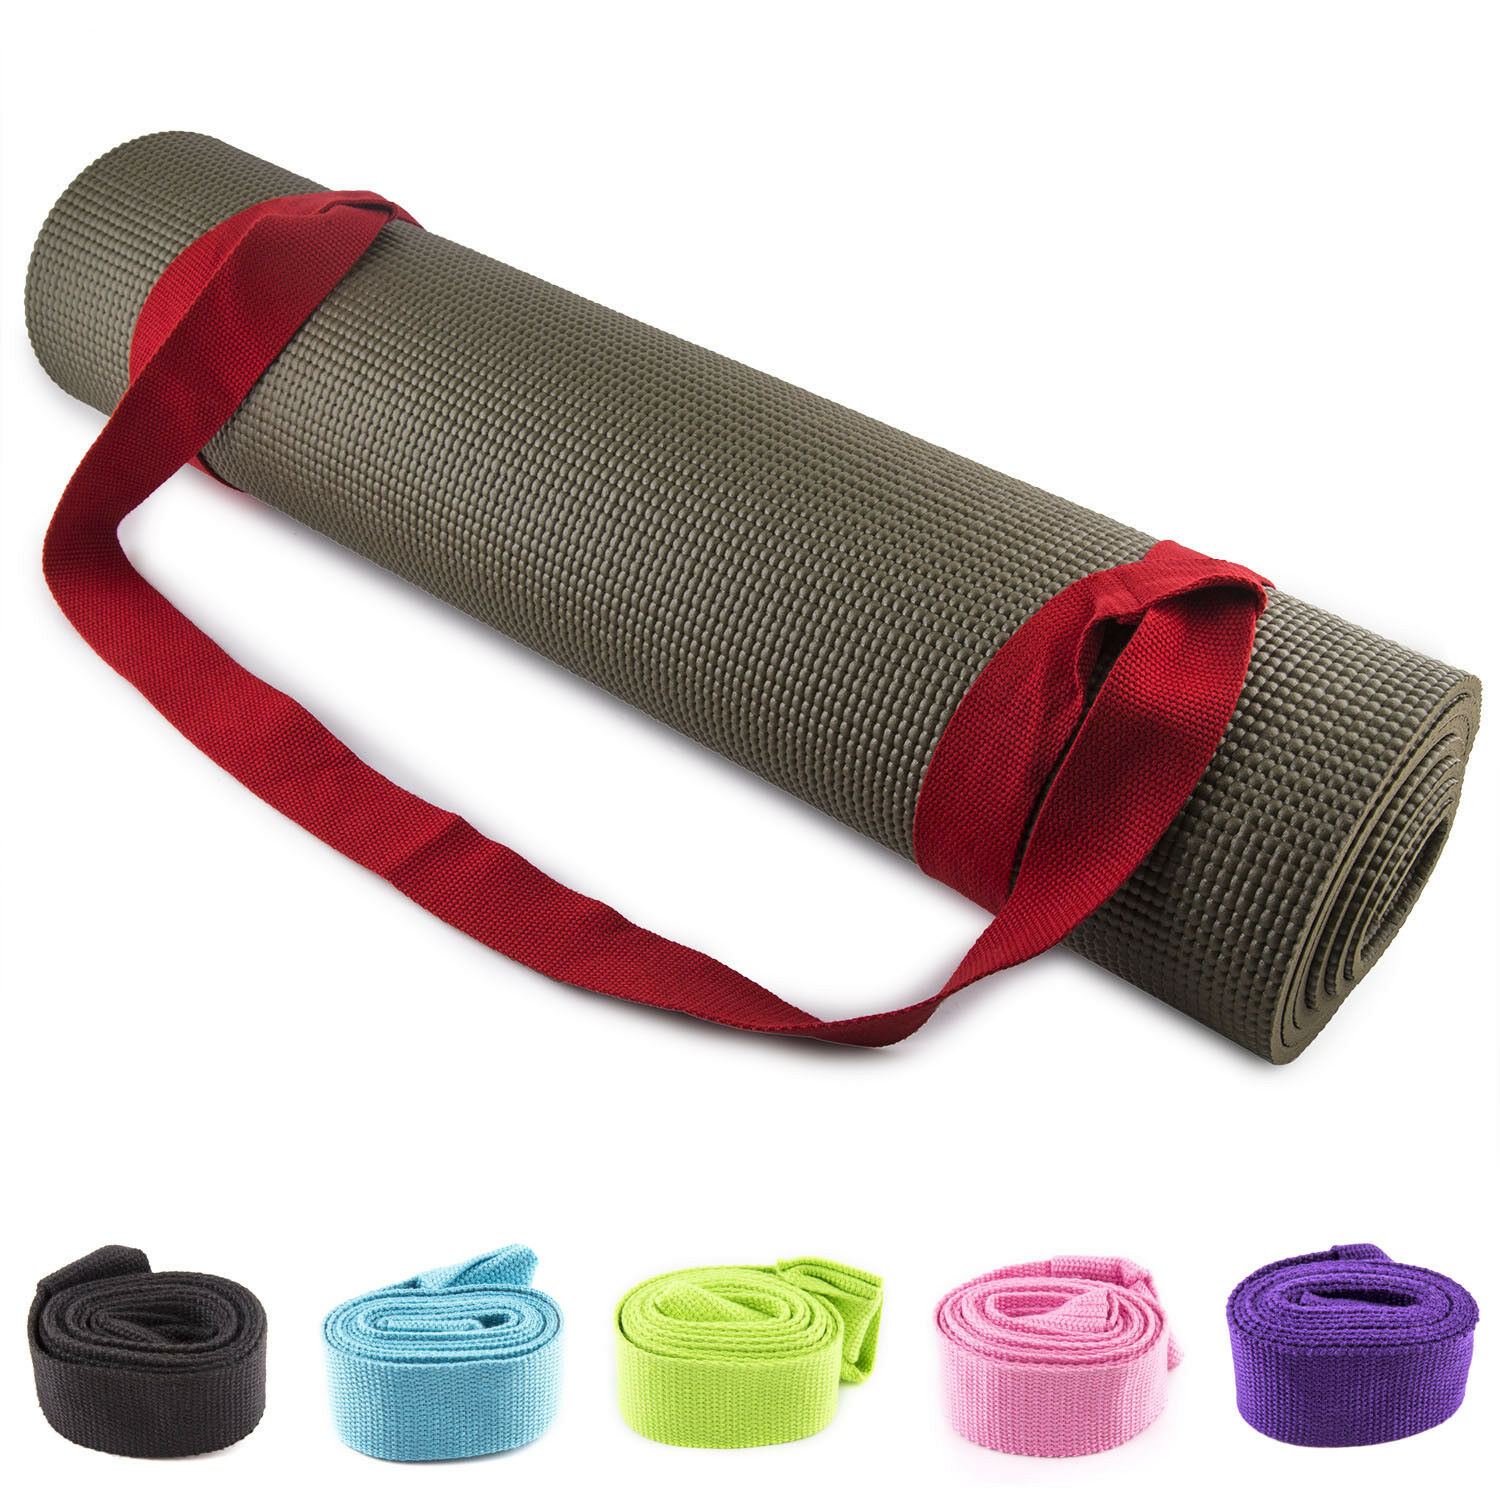 FIT SPIRIT Exercise Yoga Mat Gym Bag with 2 Cargo Pockets